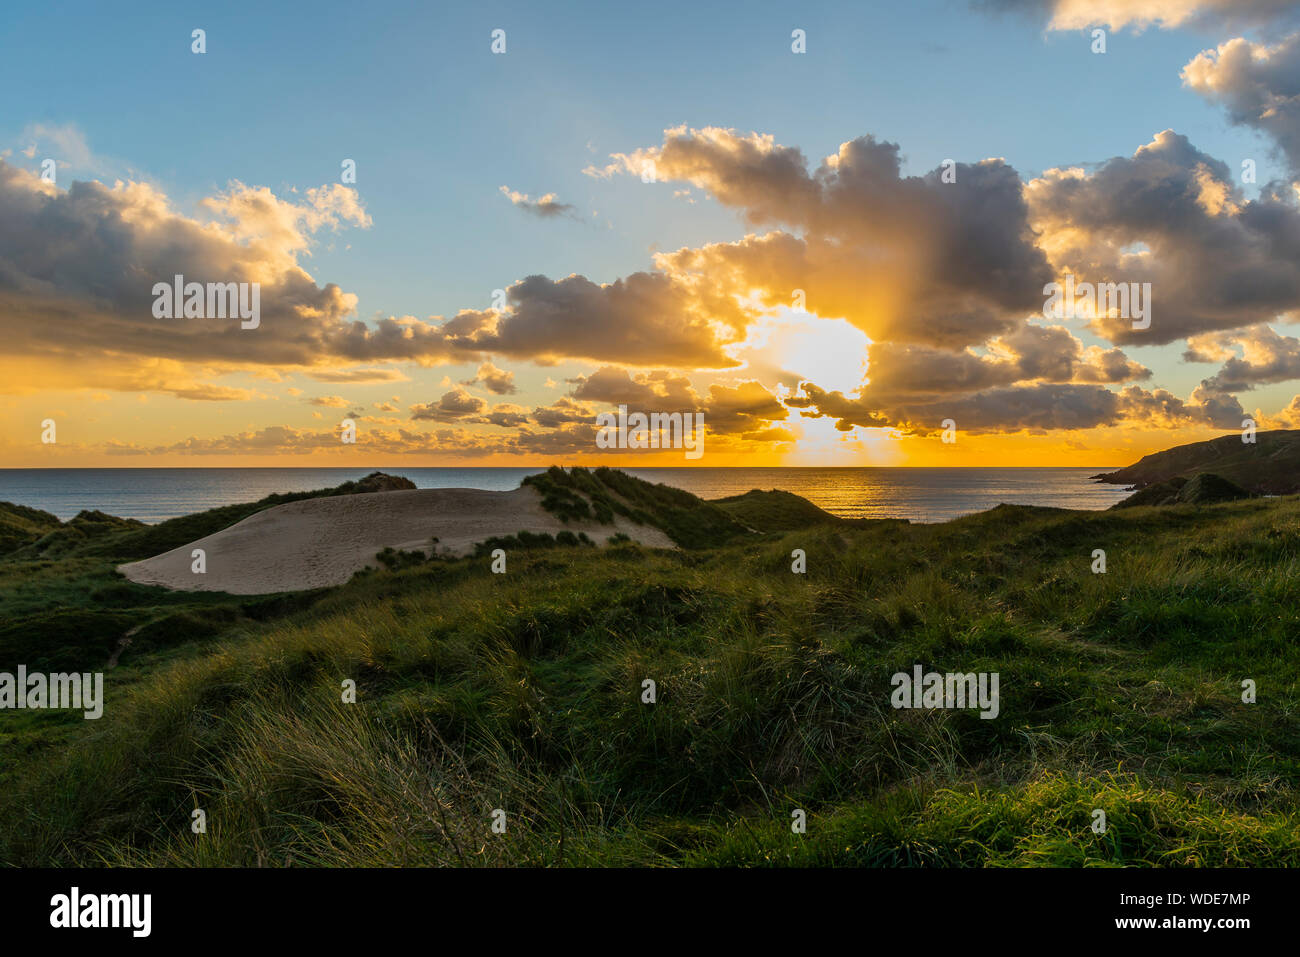 Sunset at Freshwater west beach, Wales. Looking across the dunes to the beach. Stock Photo